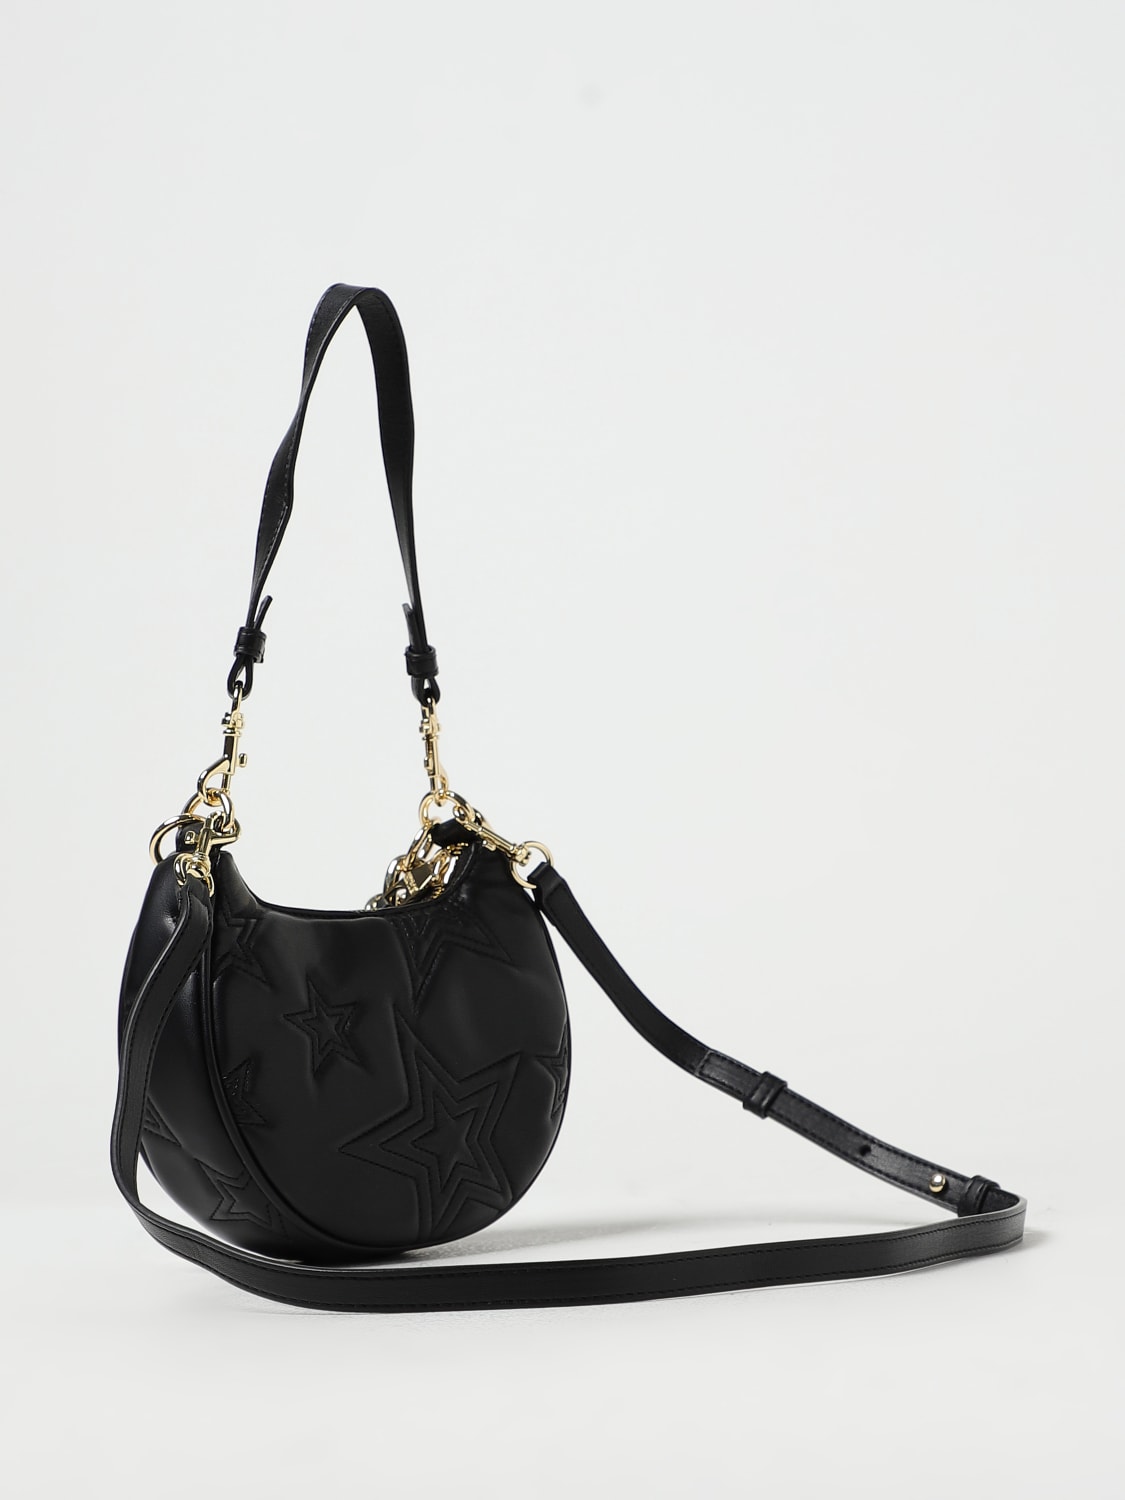 Versace Jeans Couture women hobo bags black : Clothing, Shoes & Jewelry 